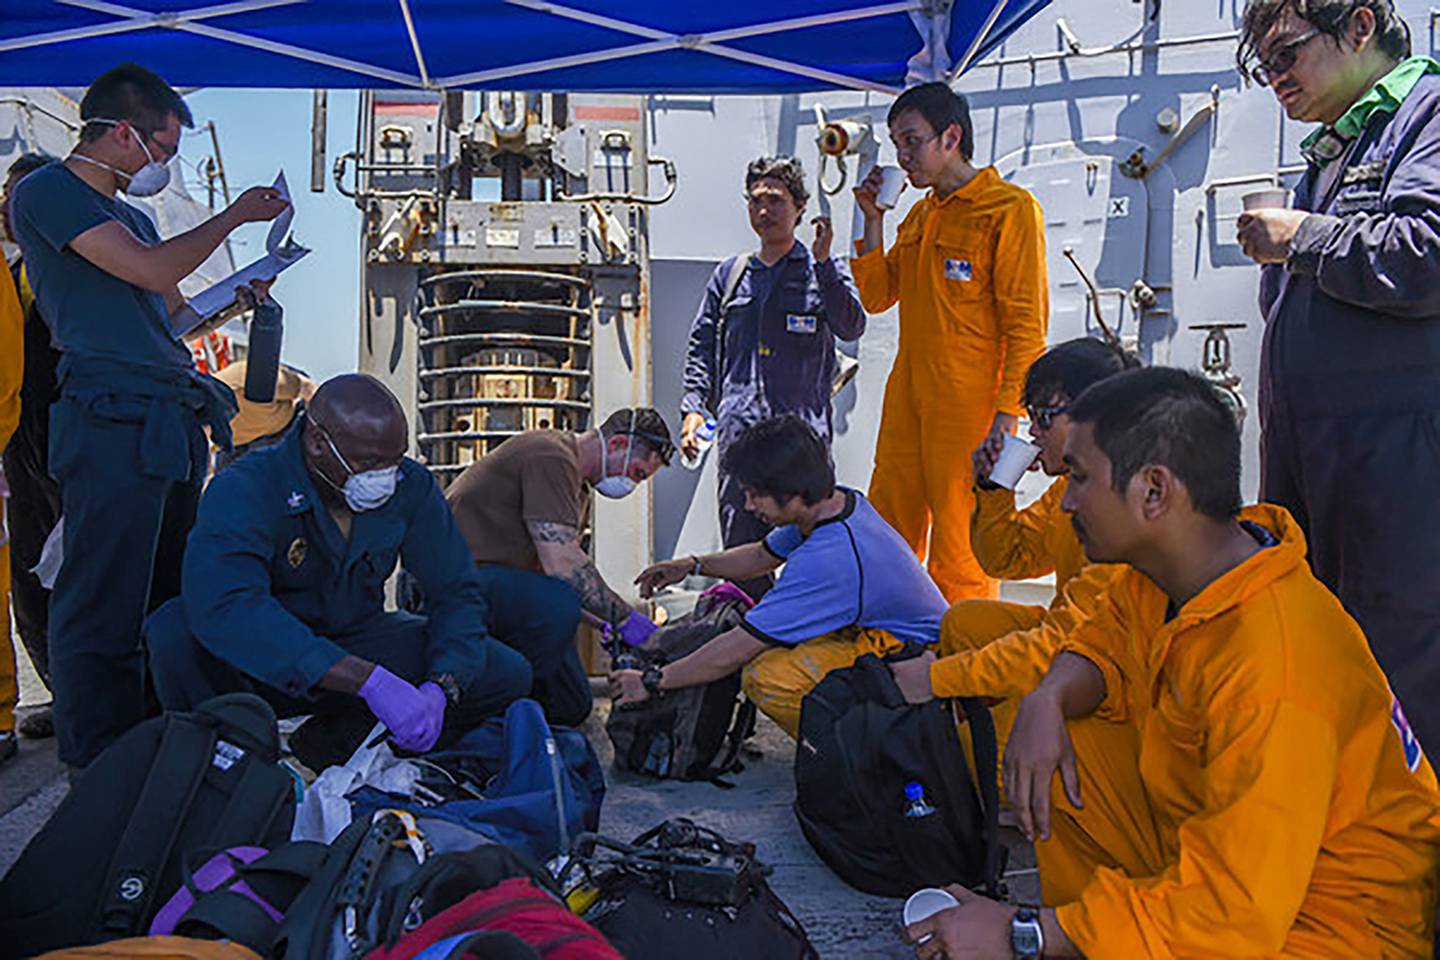 In this June 13, 2019, photo released by the U.S. Navy, sailors aboard the Arleigh Burke-class guided-missile destroyer USS Bainbridge render aid to the crew of the Kokuka Courageous, one of two oil tankers suspected to have been attacked in the Gulf of Oman.